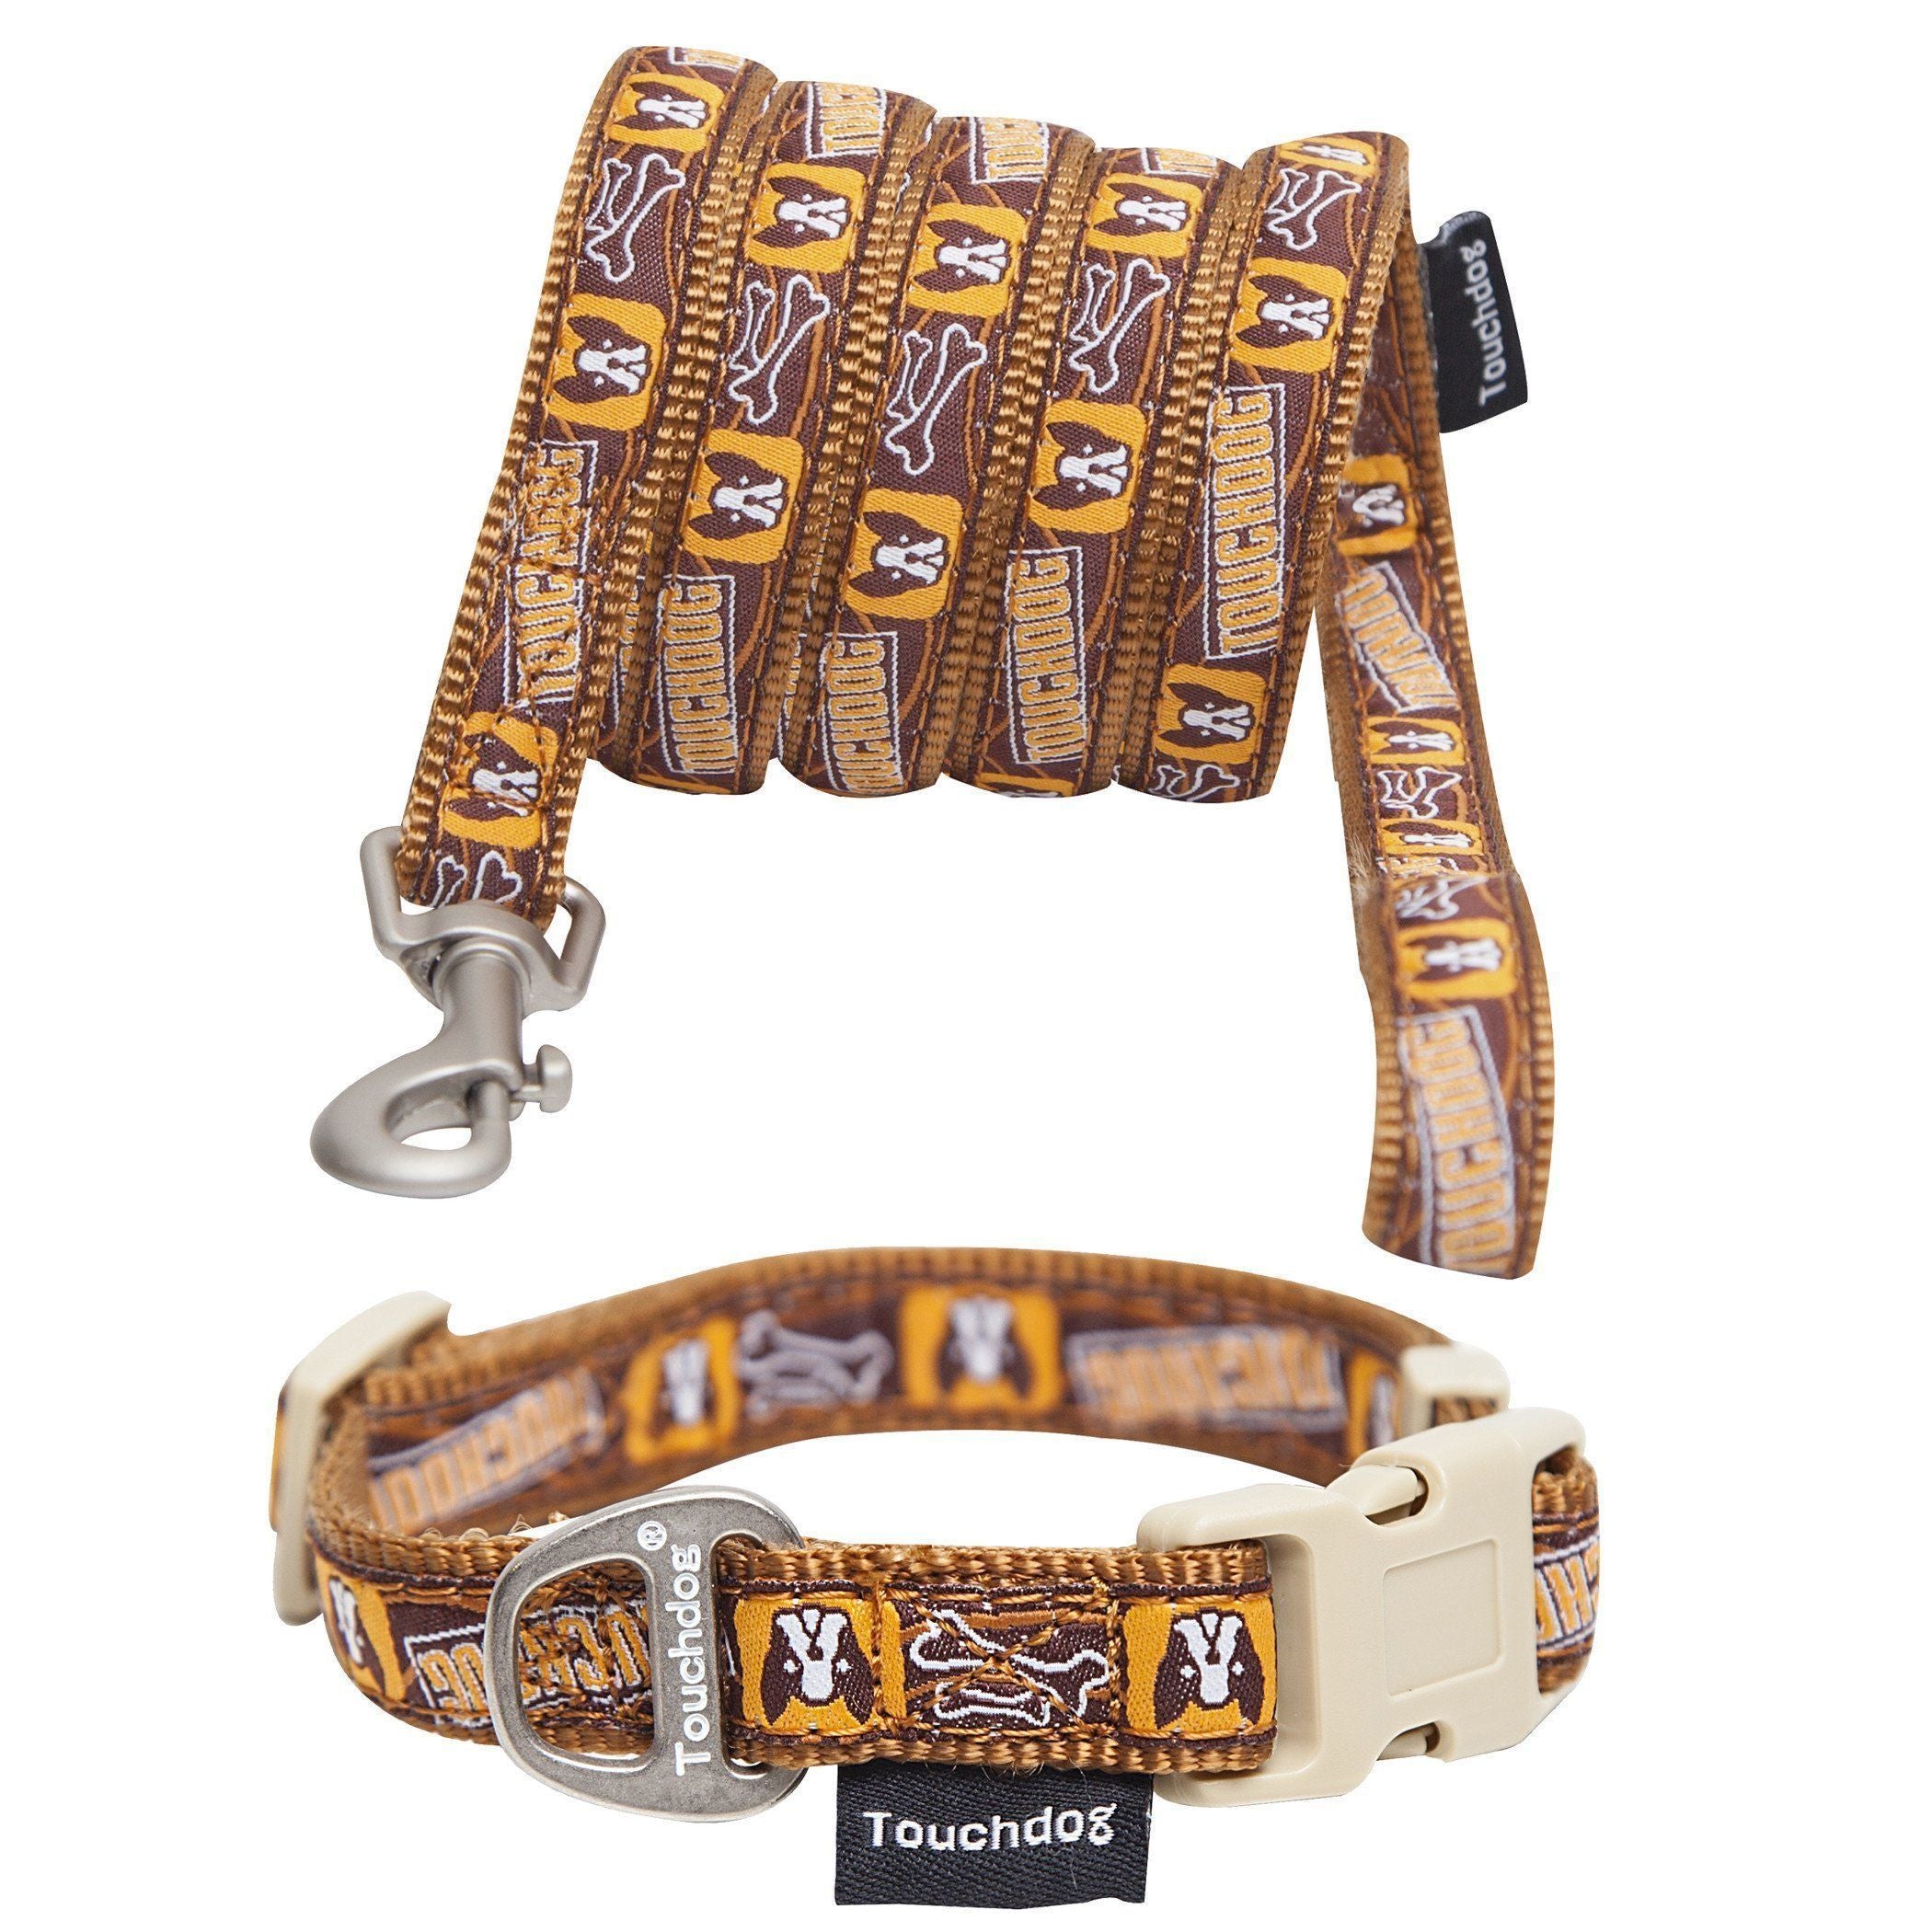 Touchdog ® 'Caliber' Designer Embroidered Fashion Pet Dog Leash and Collar Combination Small Brown Pattern